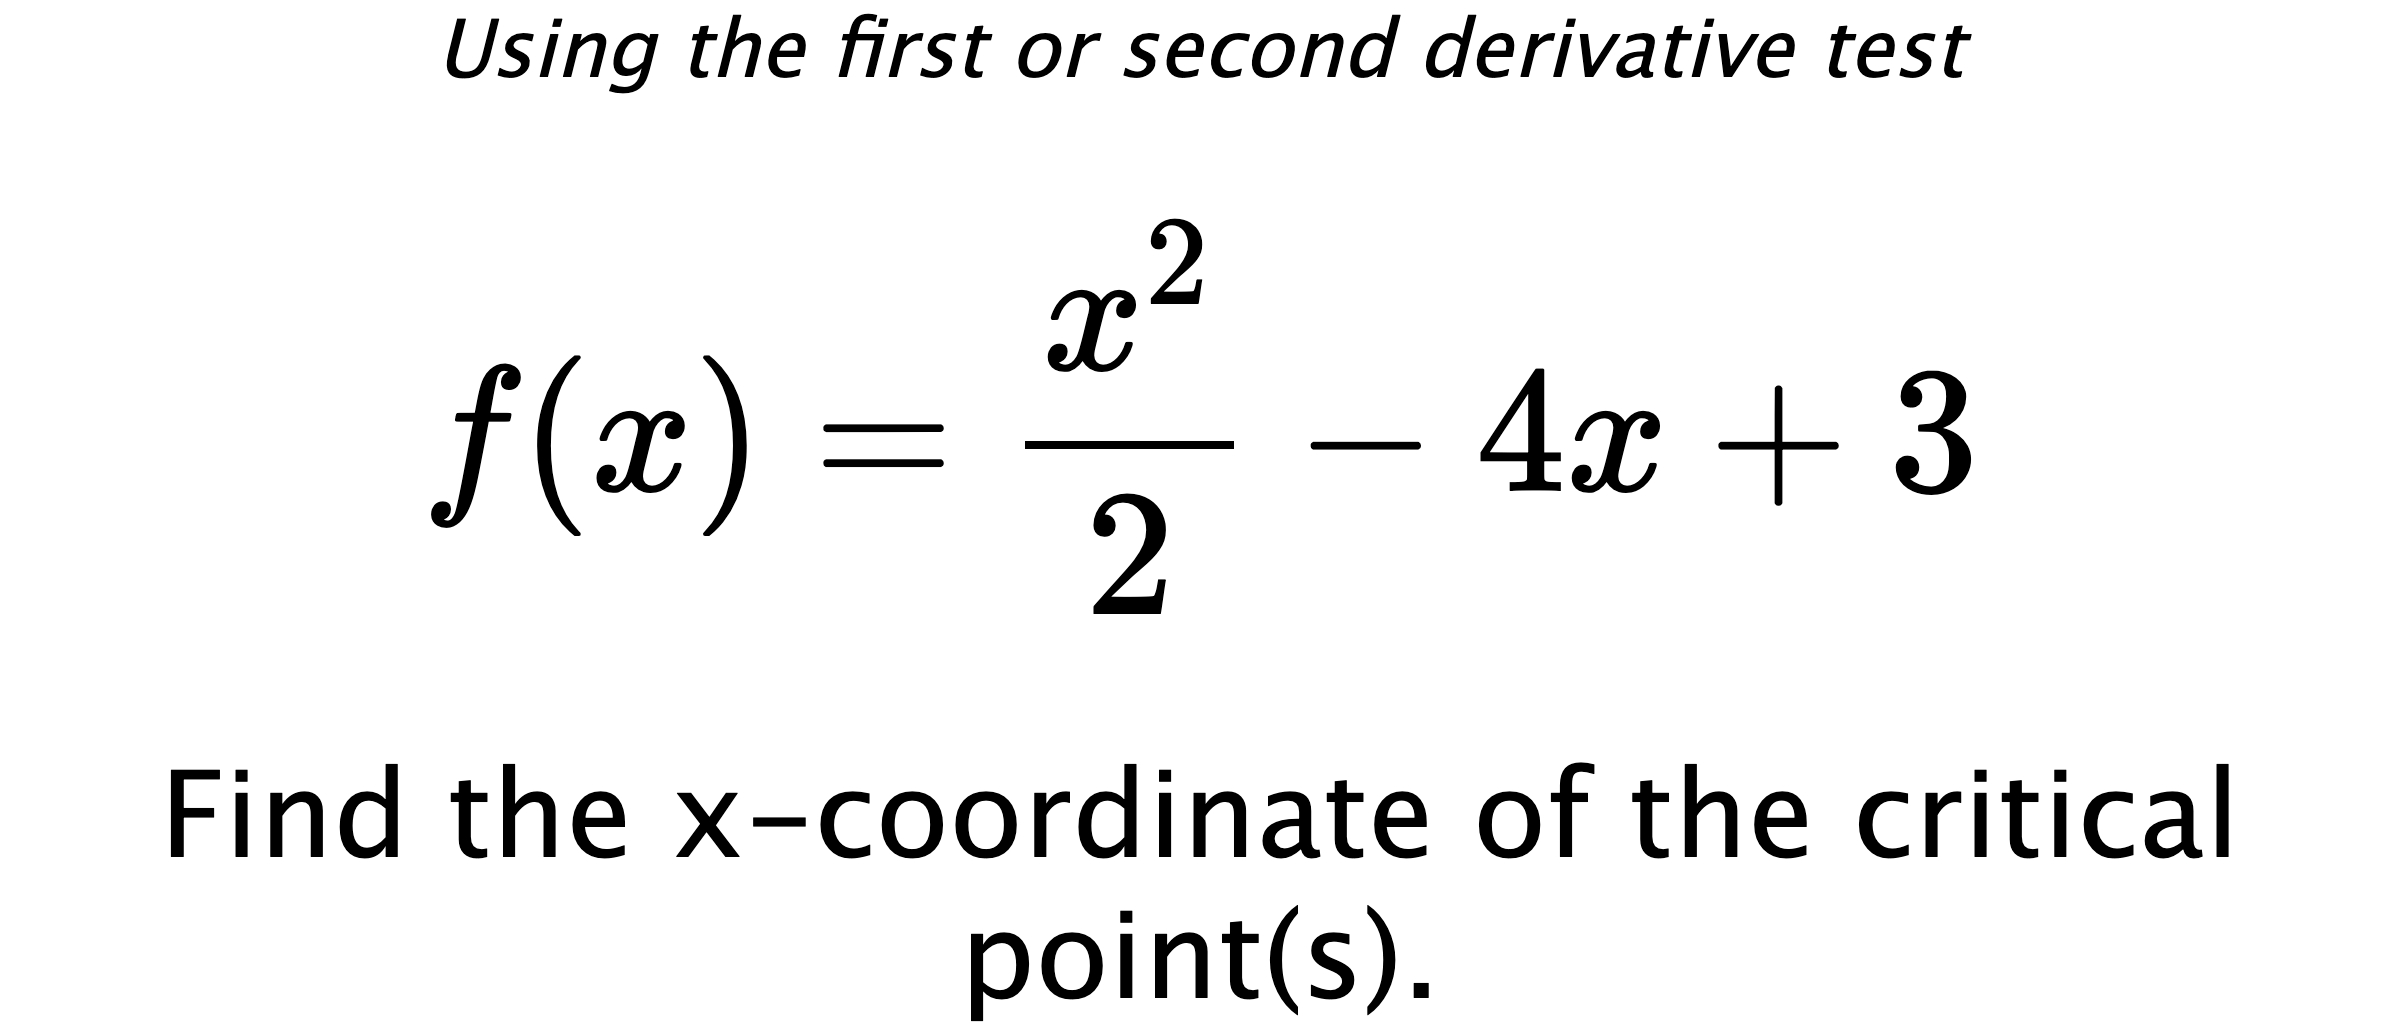 Using the first or second derivative test $$ f(x)=\frac{x^{2}}{2}-4x+3 $$ Find the x-coordinate of the critical point(s).